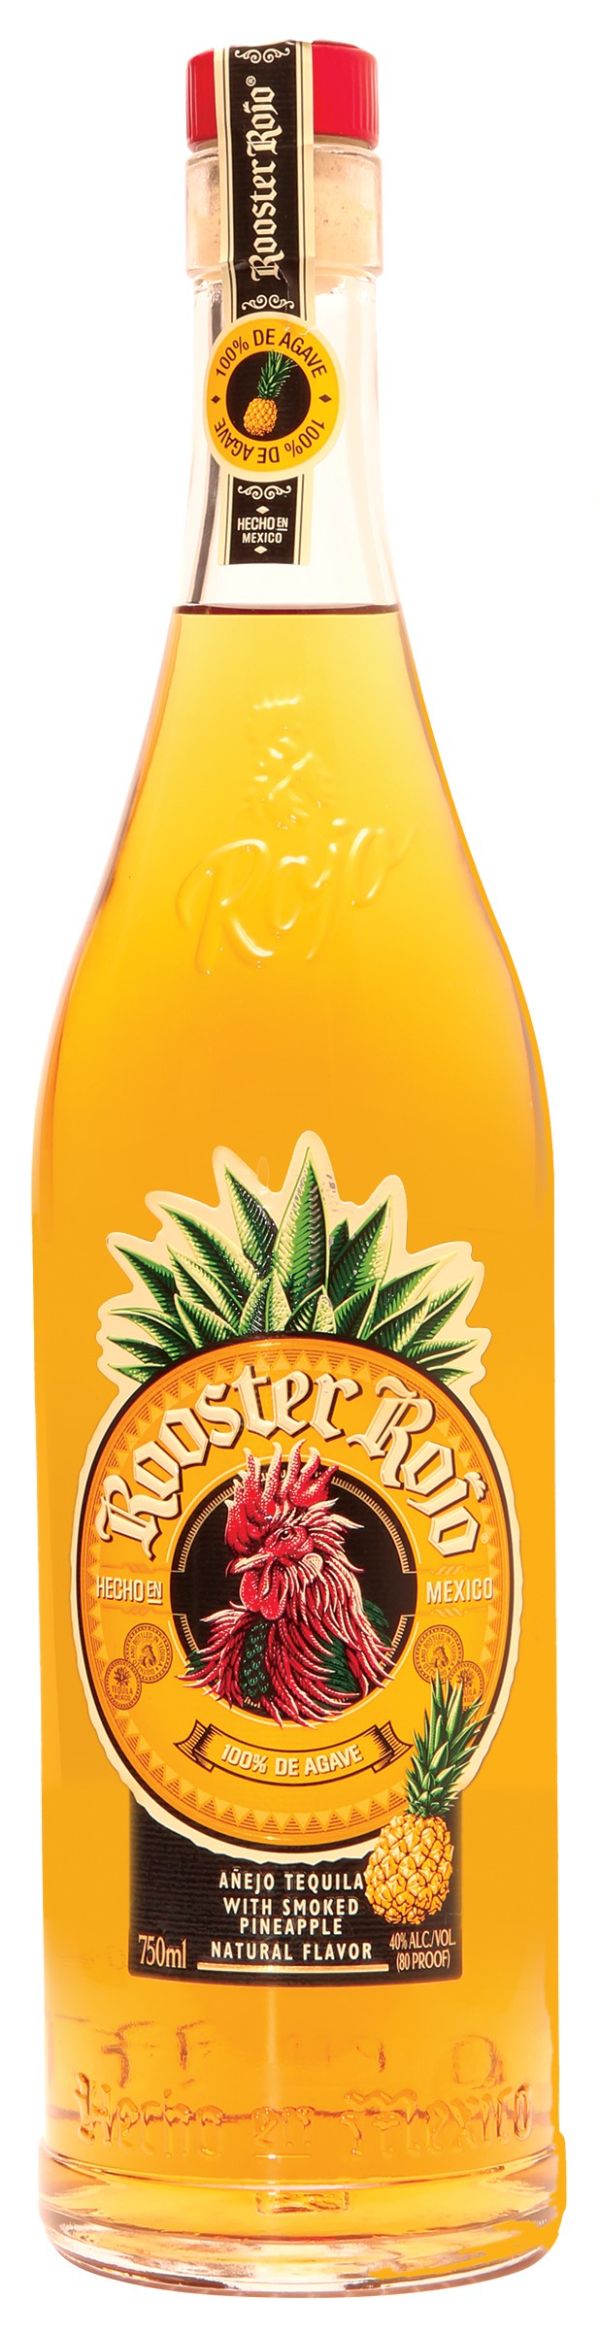 Buy Rooster Rojo Pineapple Anejo Tequila Online -Craft City